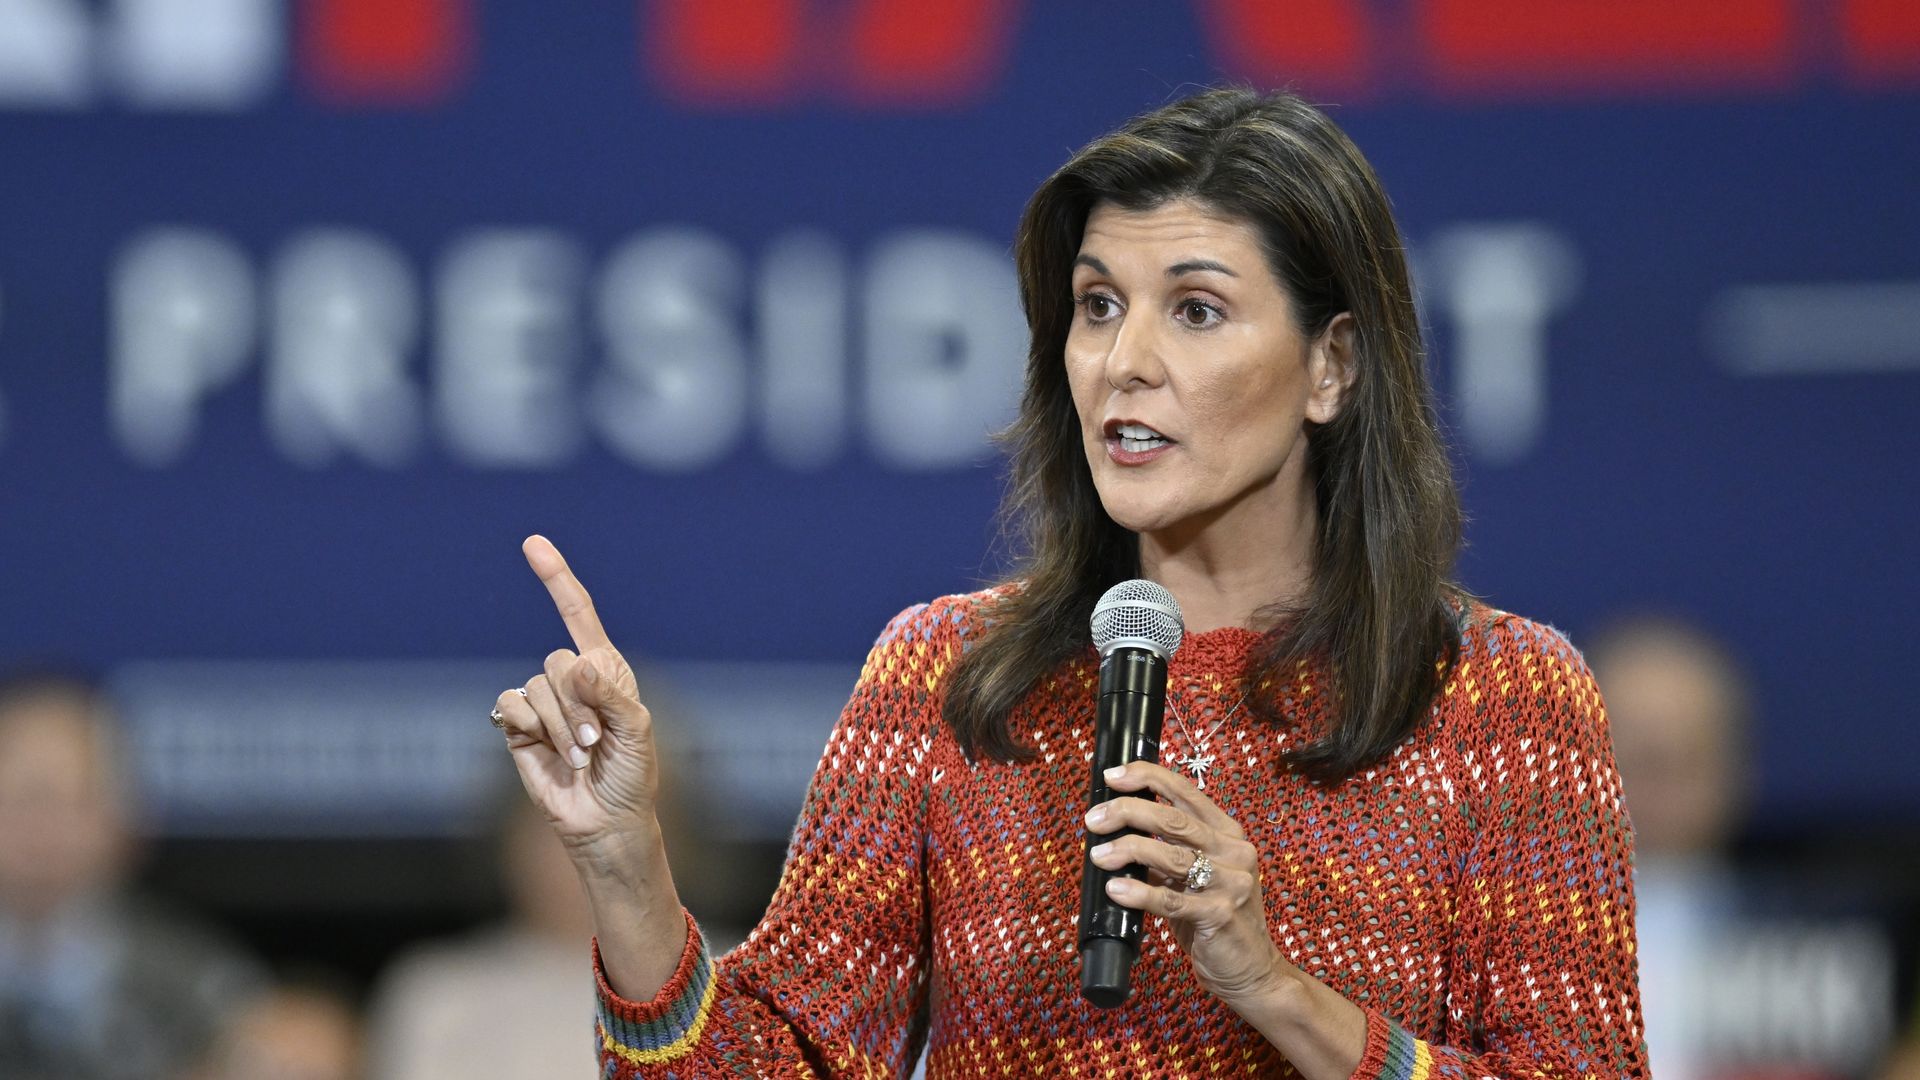 Republican presidential candidate and former South Carolina governor Nikki Haley holds a rally in Greer, South Carolina, United States on May 4, 2023 